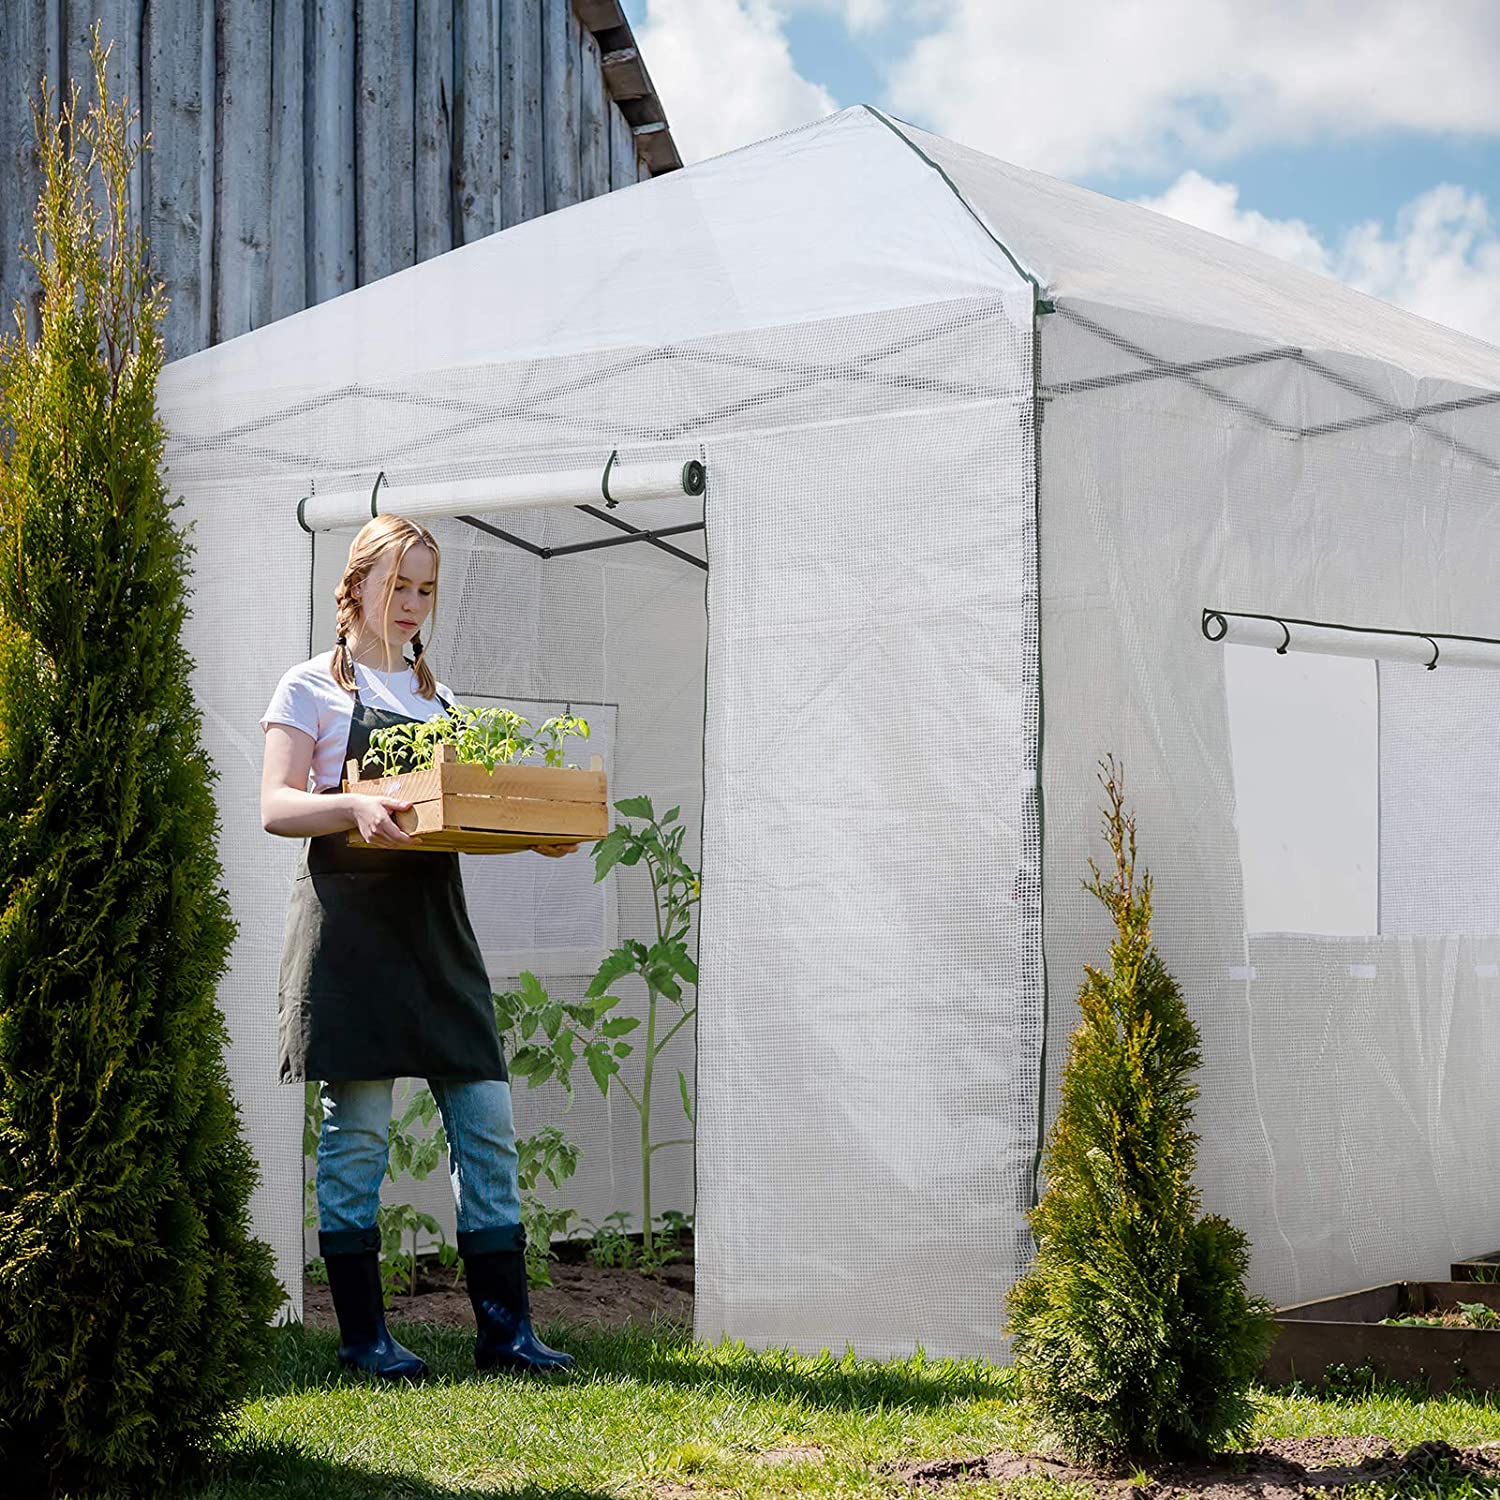 EAGLE PEAK 10'x 10' Portable Walk-in Greenhouse Instant Pop-up Easy Setup  Indoor Outdoor Plant Gardening Green House Canopy, Front and Rear Roll-Up  Zipper Entry Doors and Large Roll-Up Side Windows